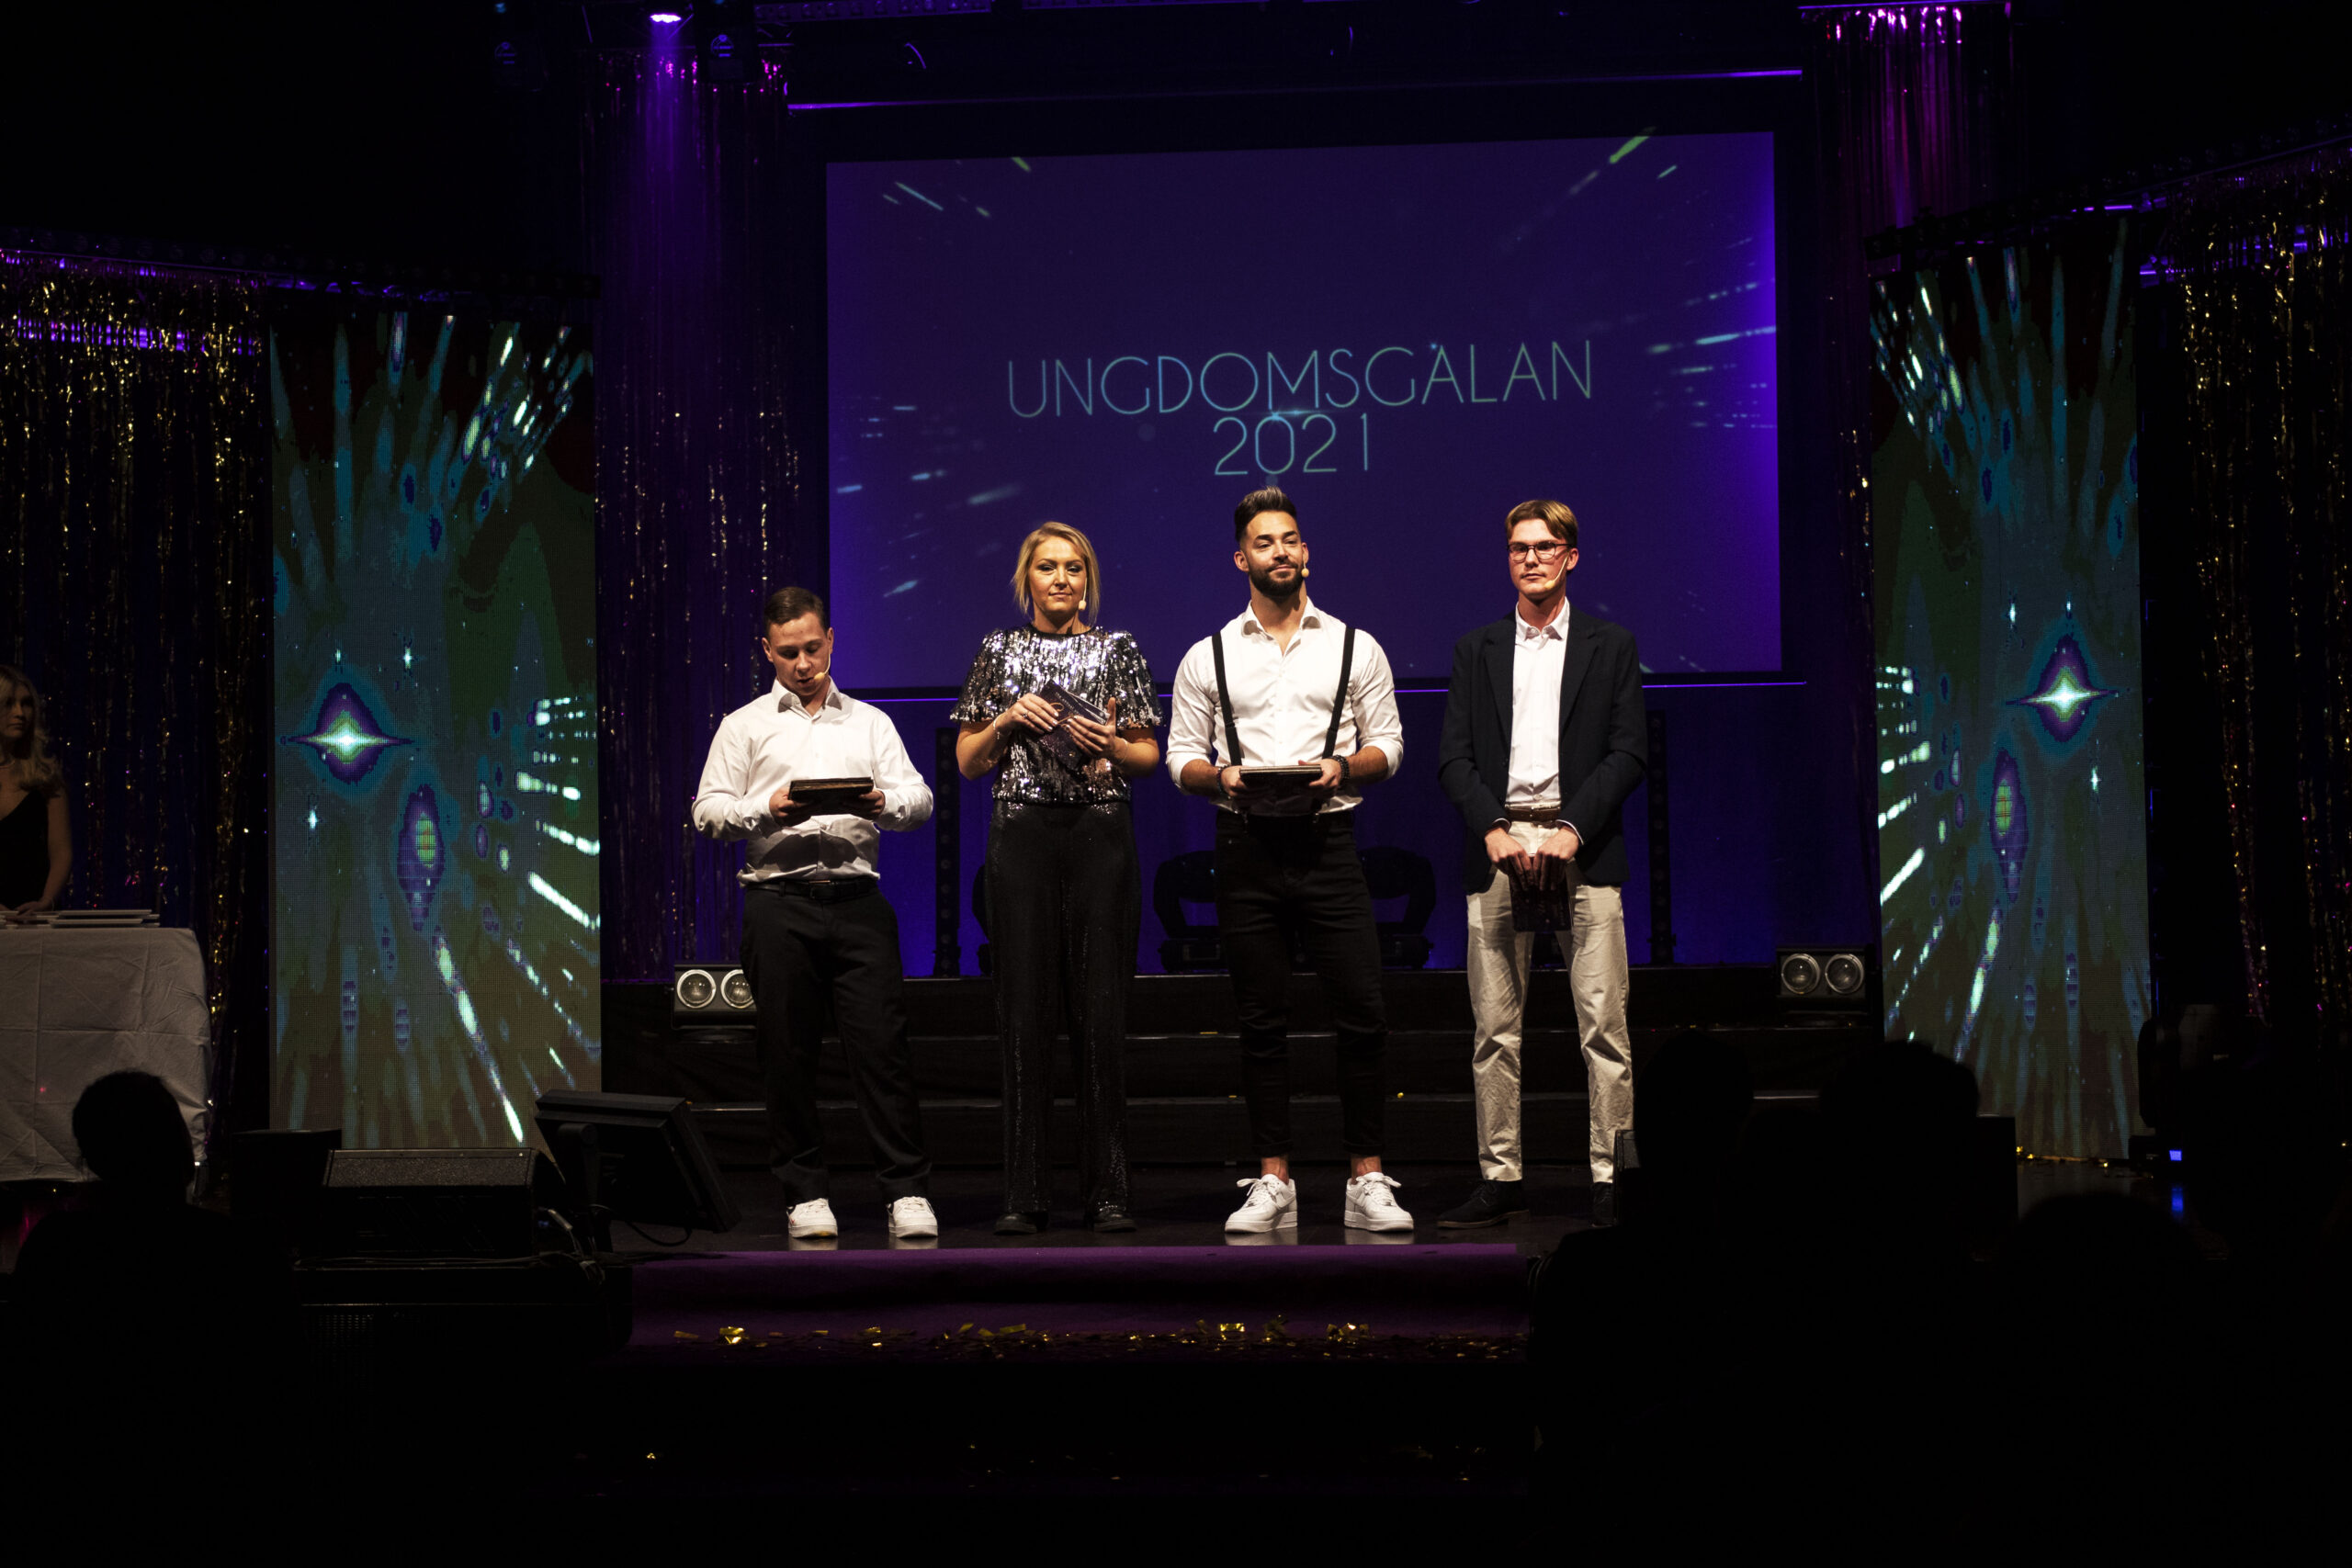 Ungdomsgalan – The Annual Youth Award